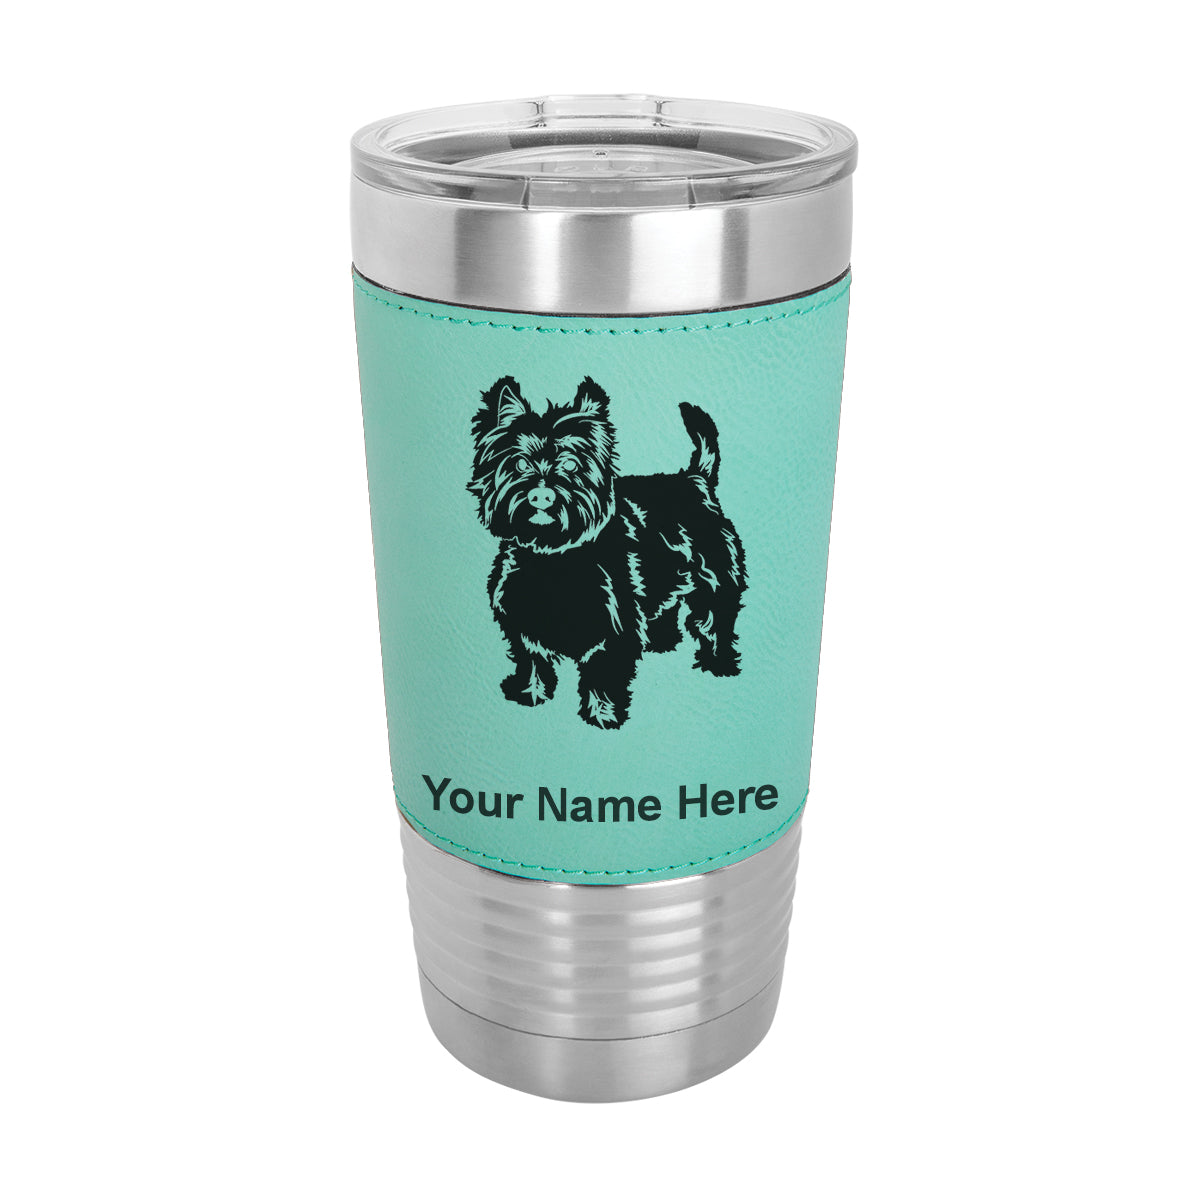 20oz Faux Leather Tumbler Mug, West Highland Terrier Dog, Personalized Engraving Included